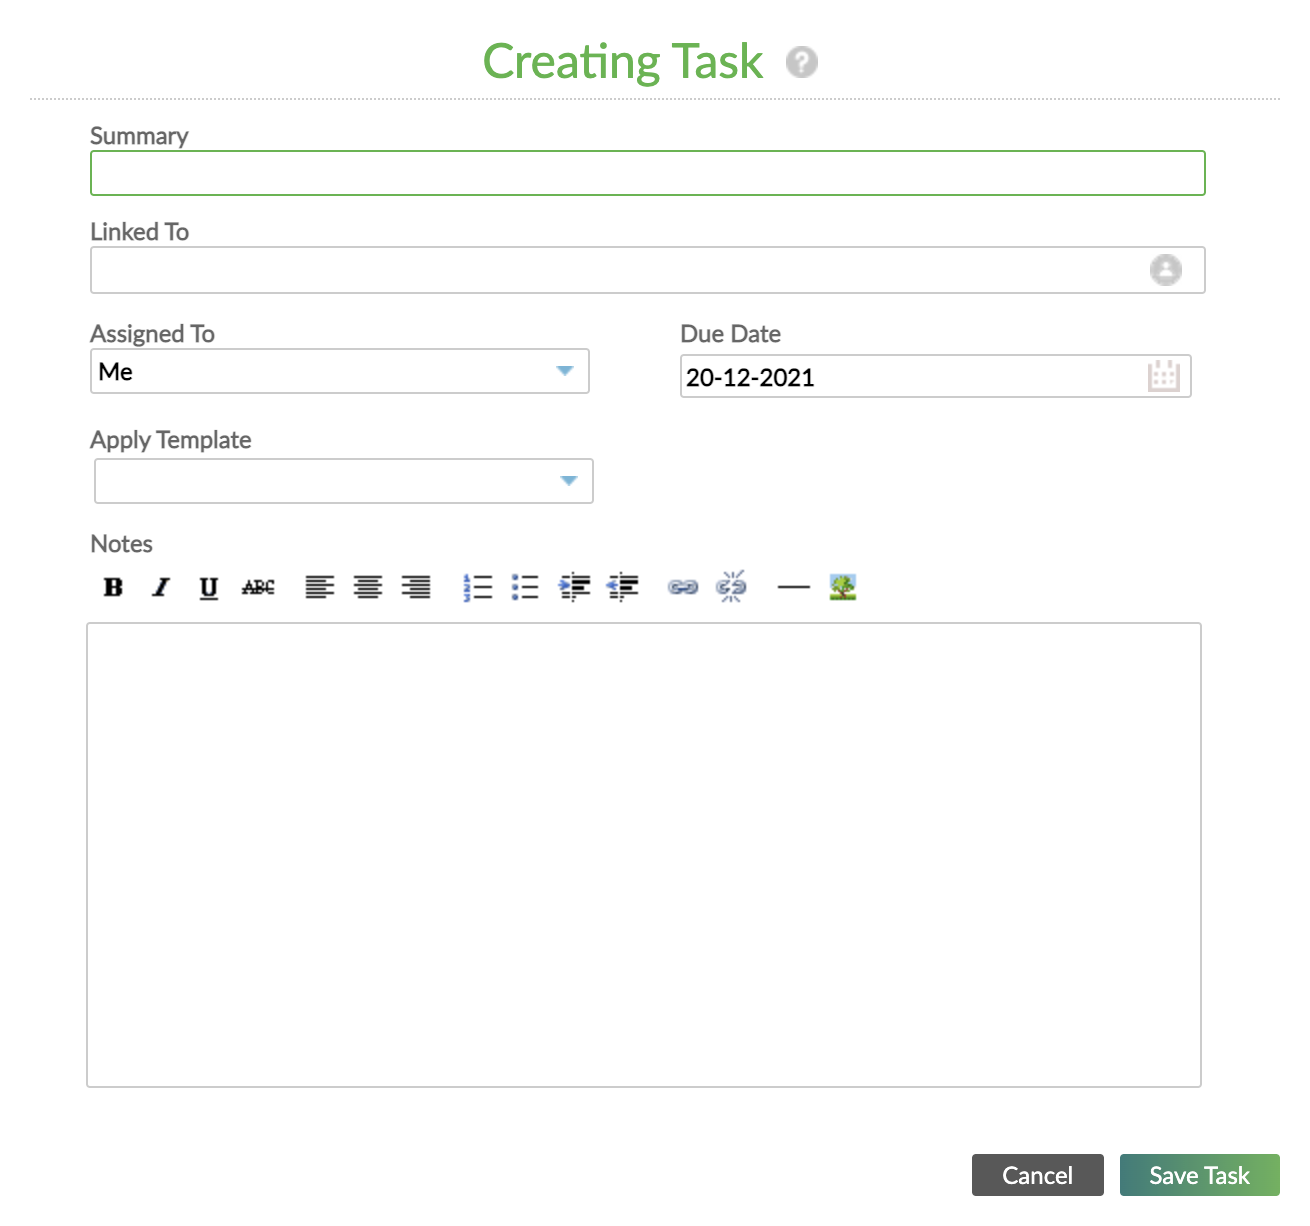 Creating Task form with Summary, Linked To, Assiged To, Due Date and Notes fields.